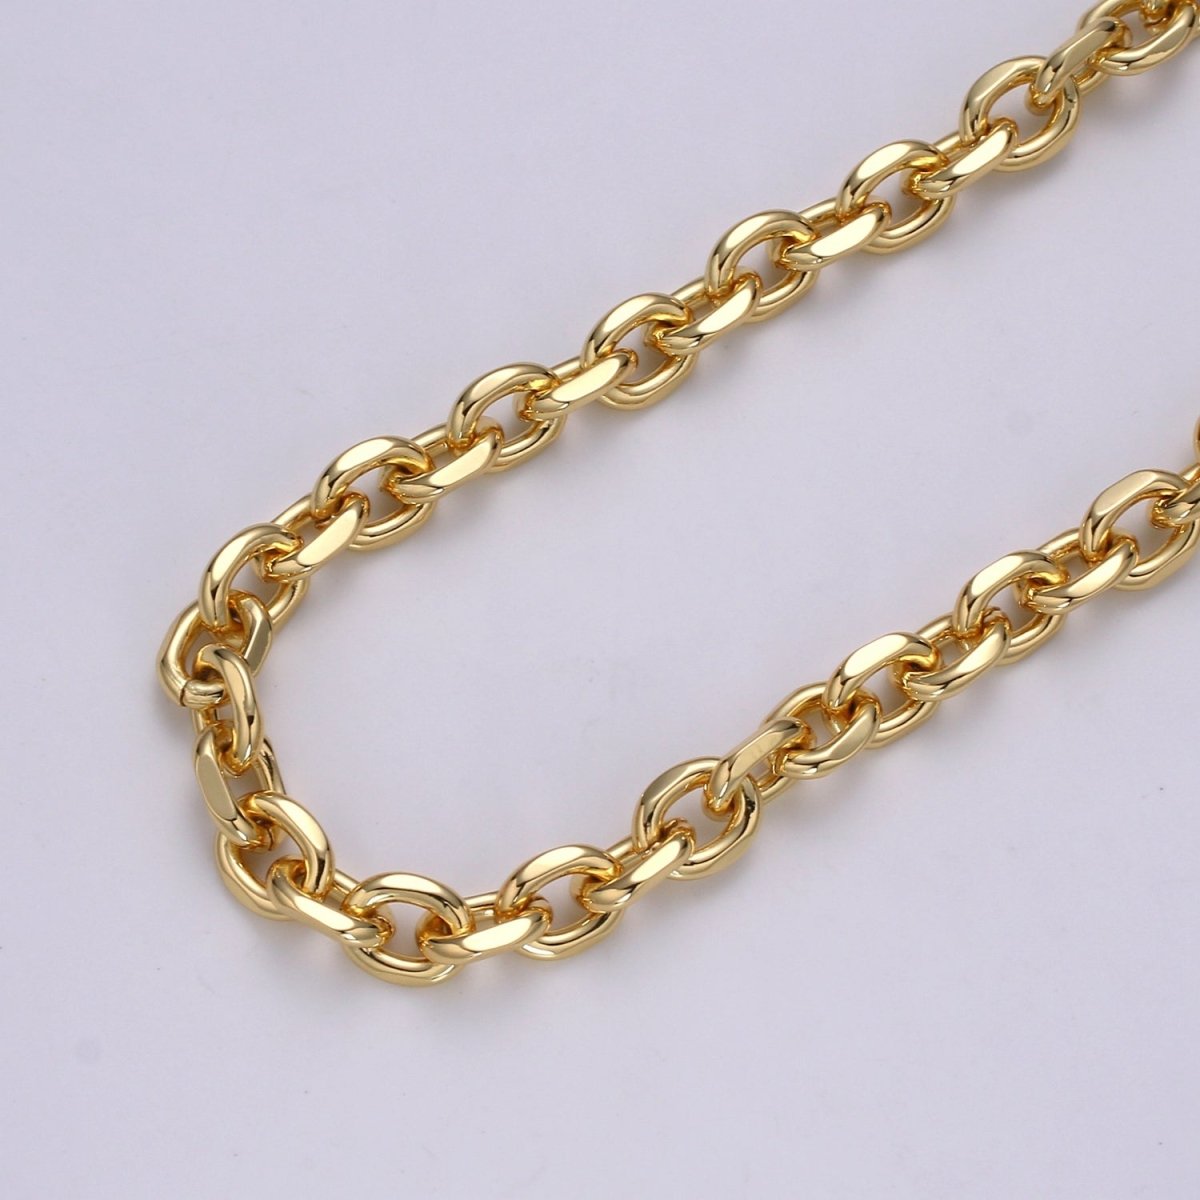 7.5X9mm 24K Gold Filled CABLE Chain Sold by Yard, Unfinished Chain For Necklace Bracelet Anklet Component Supply | ROLL-496 Clearance Pricing - DLUXCA